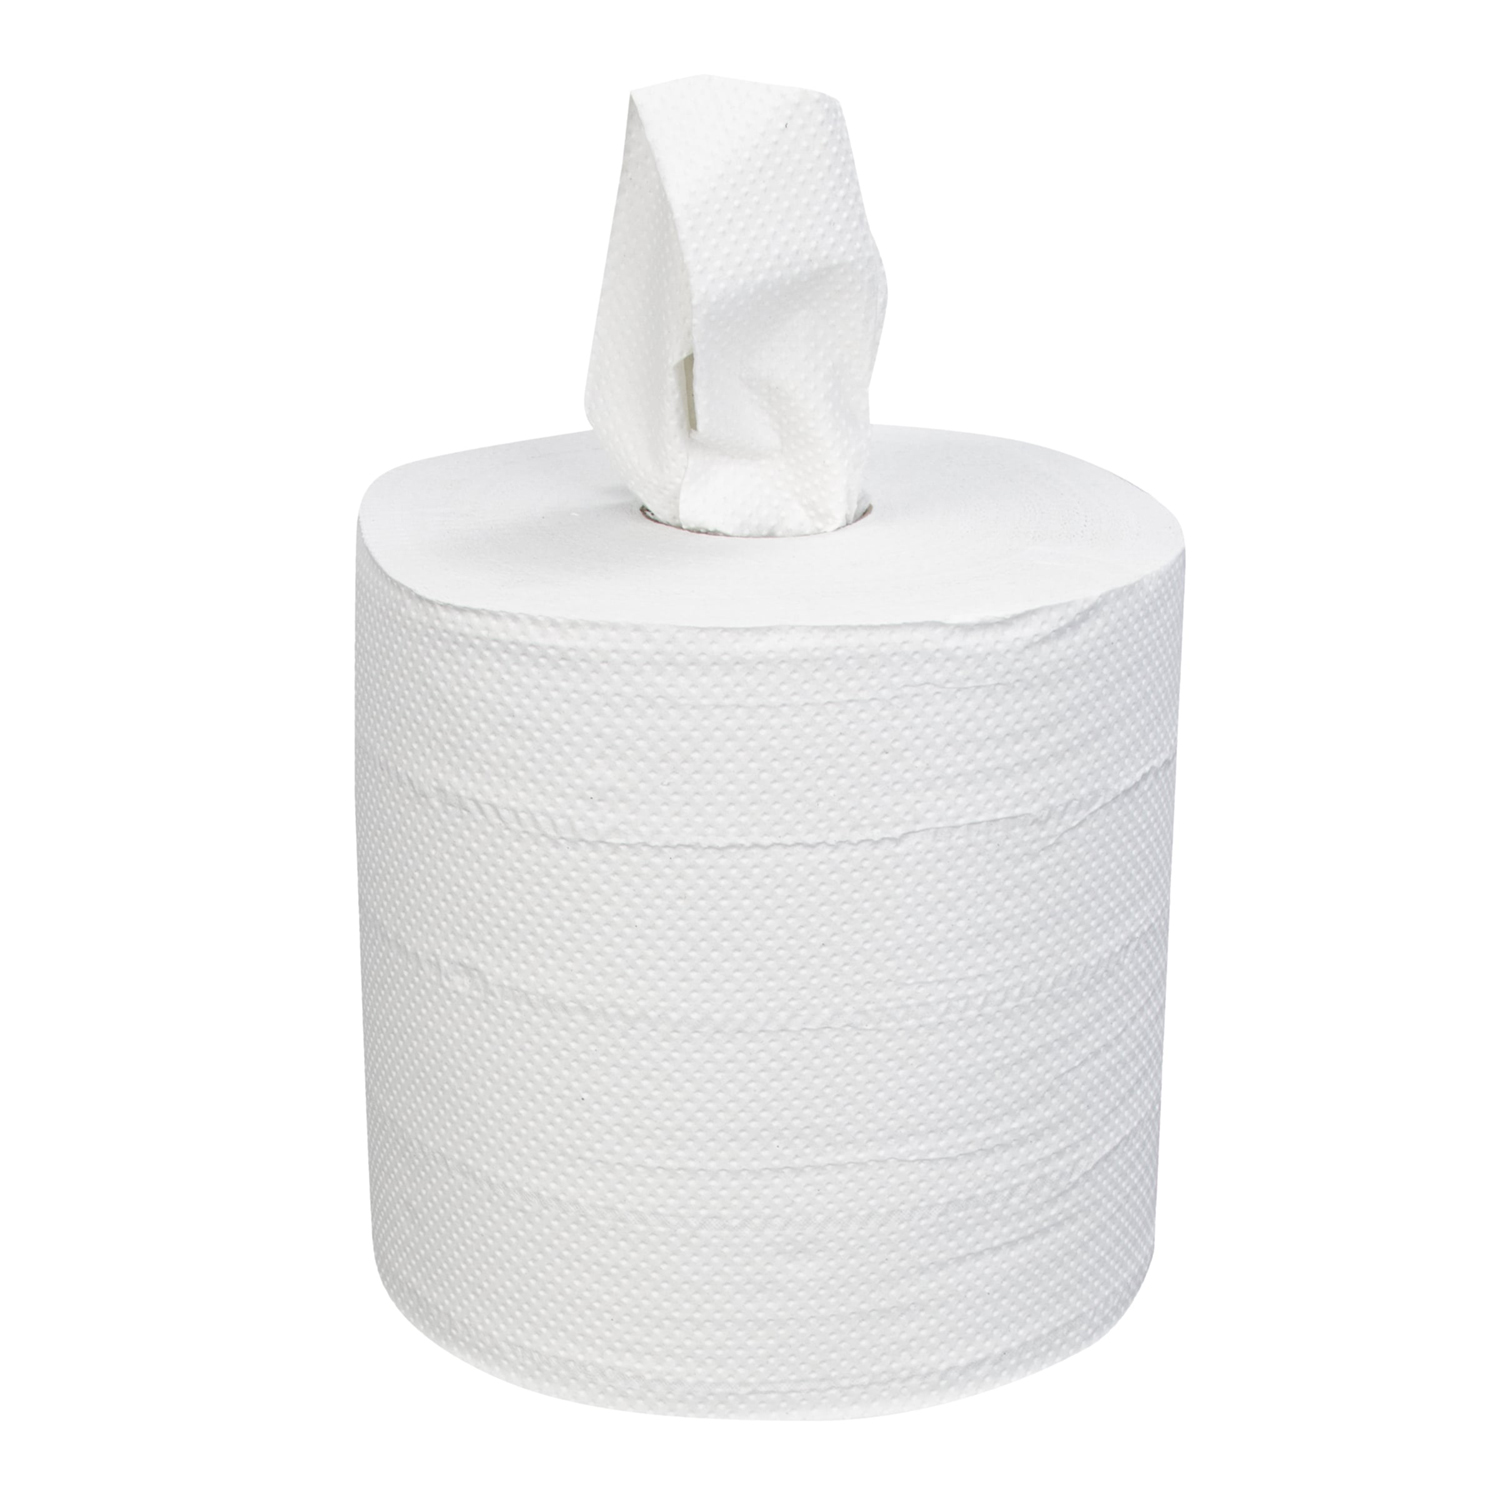 TOWEL CENTER PULL WHITE 2PLY